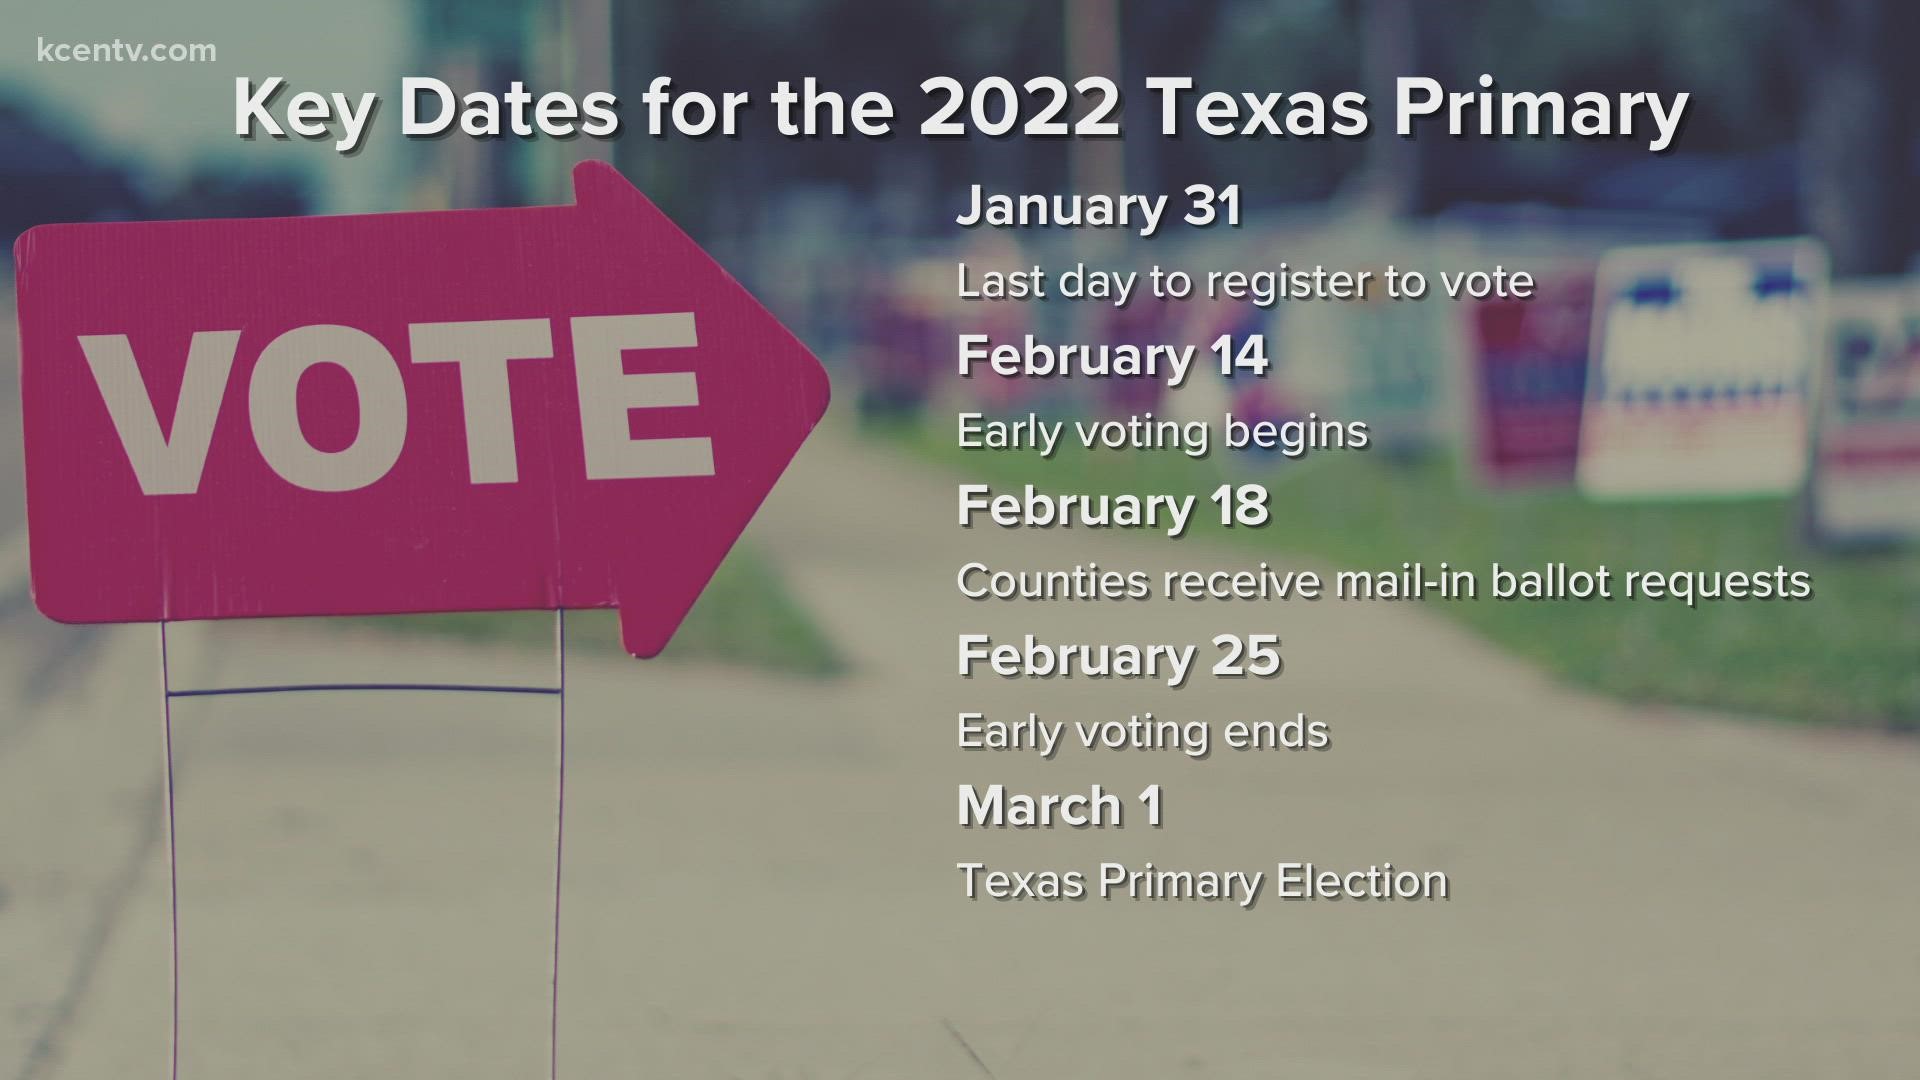 January 31 is the last to register before the Primary Election on March 1